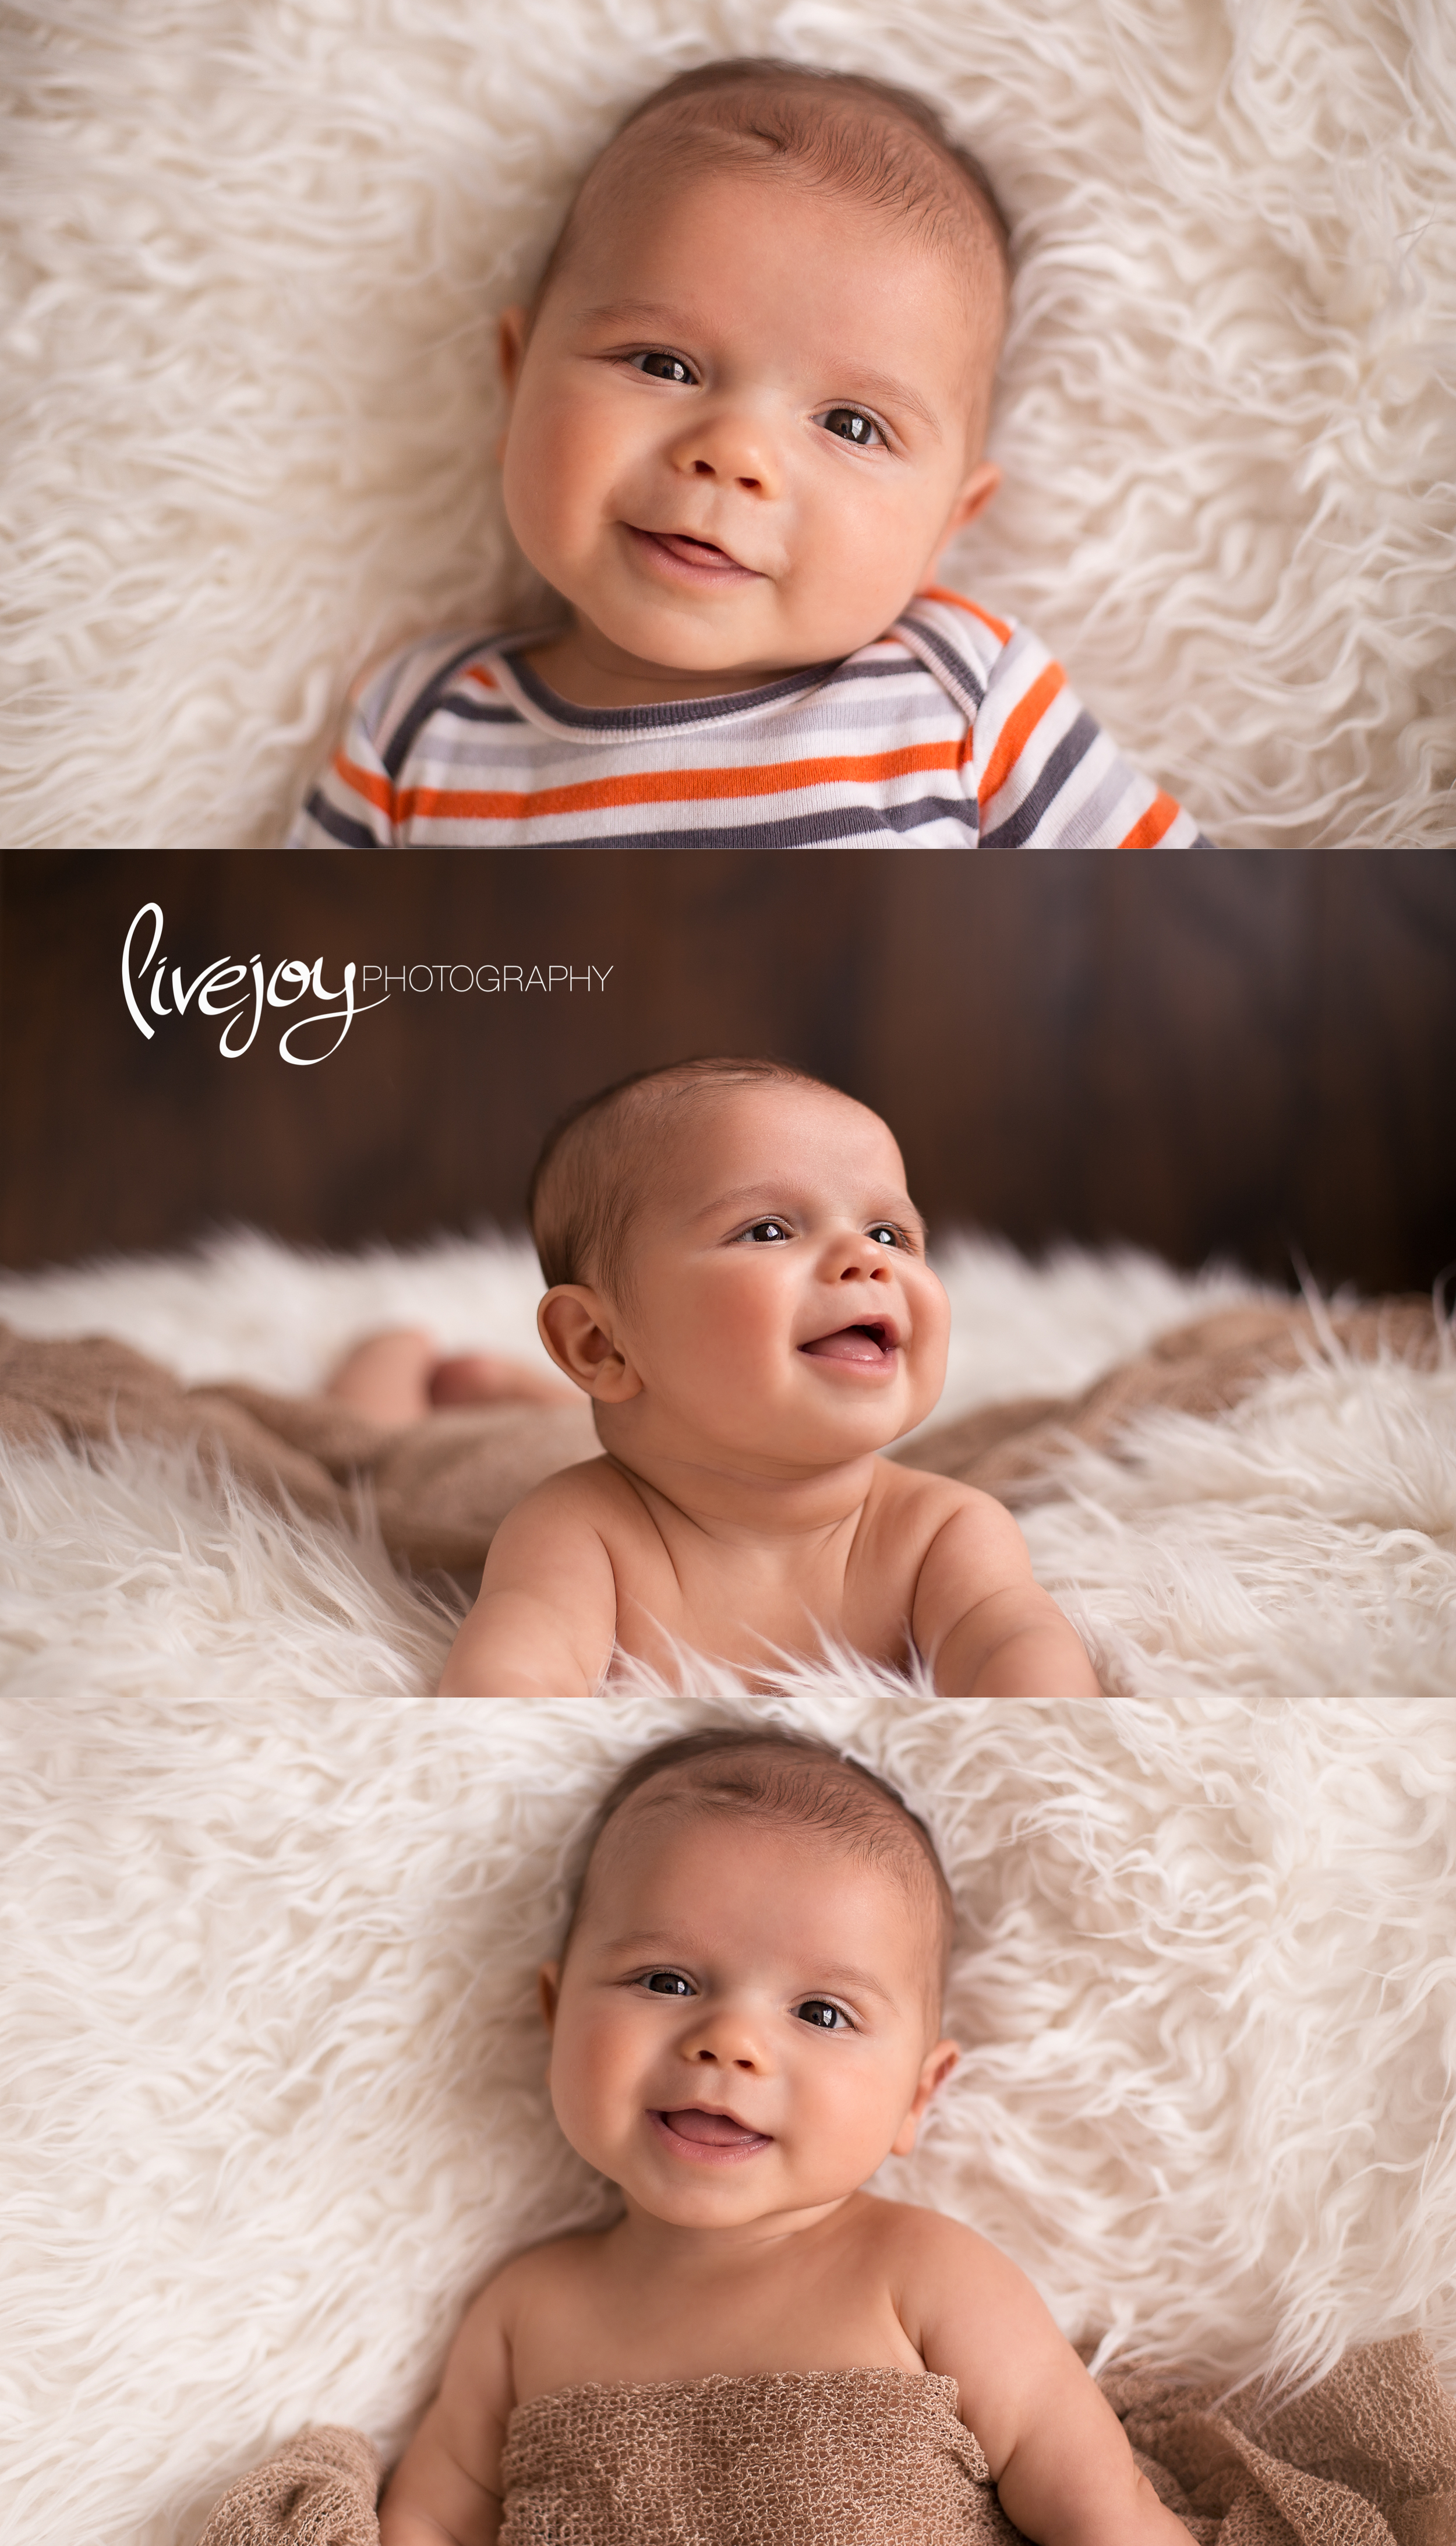 3 Months | Baby Photos | LiveJoy Photography in Oregon